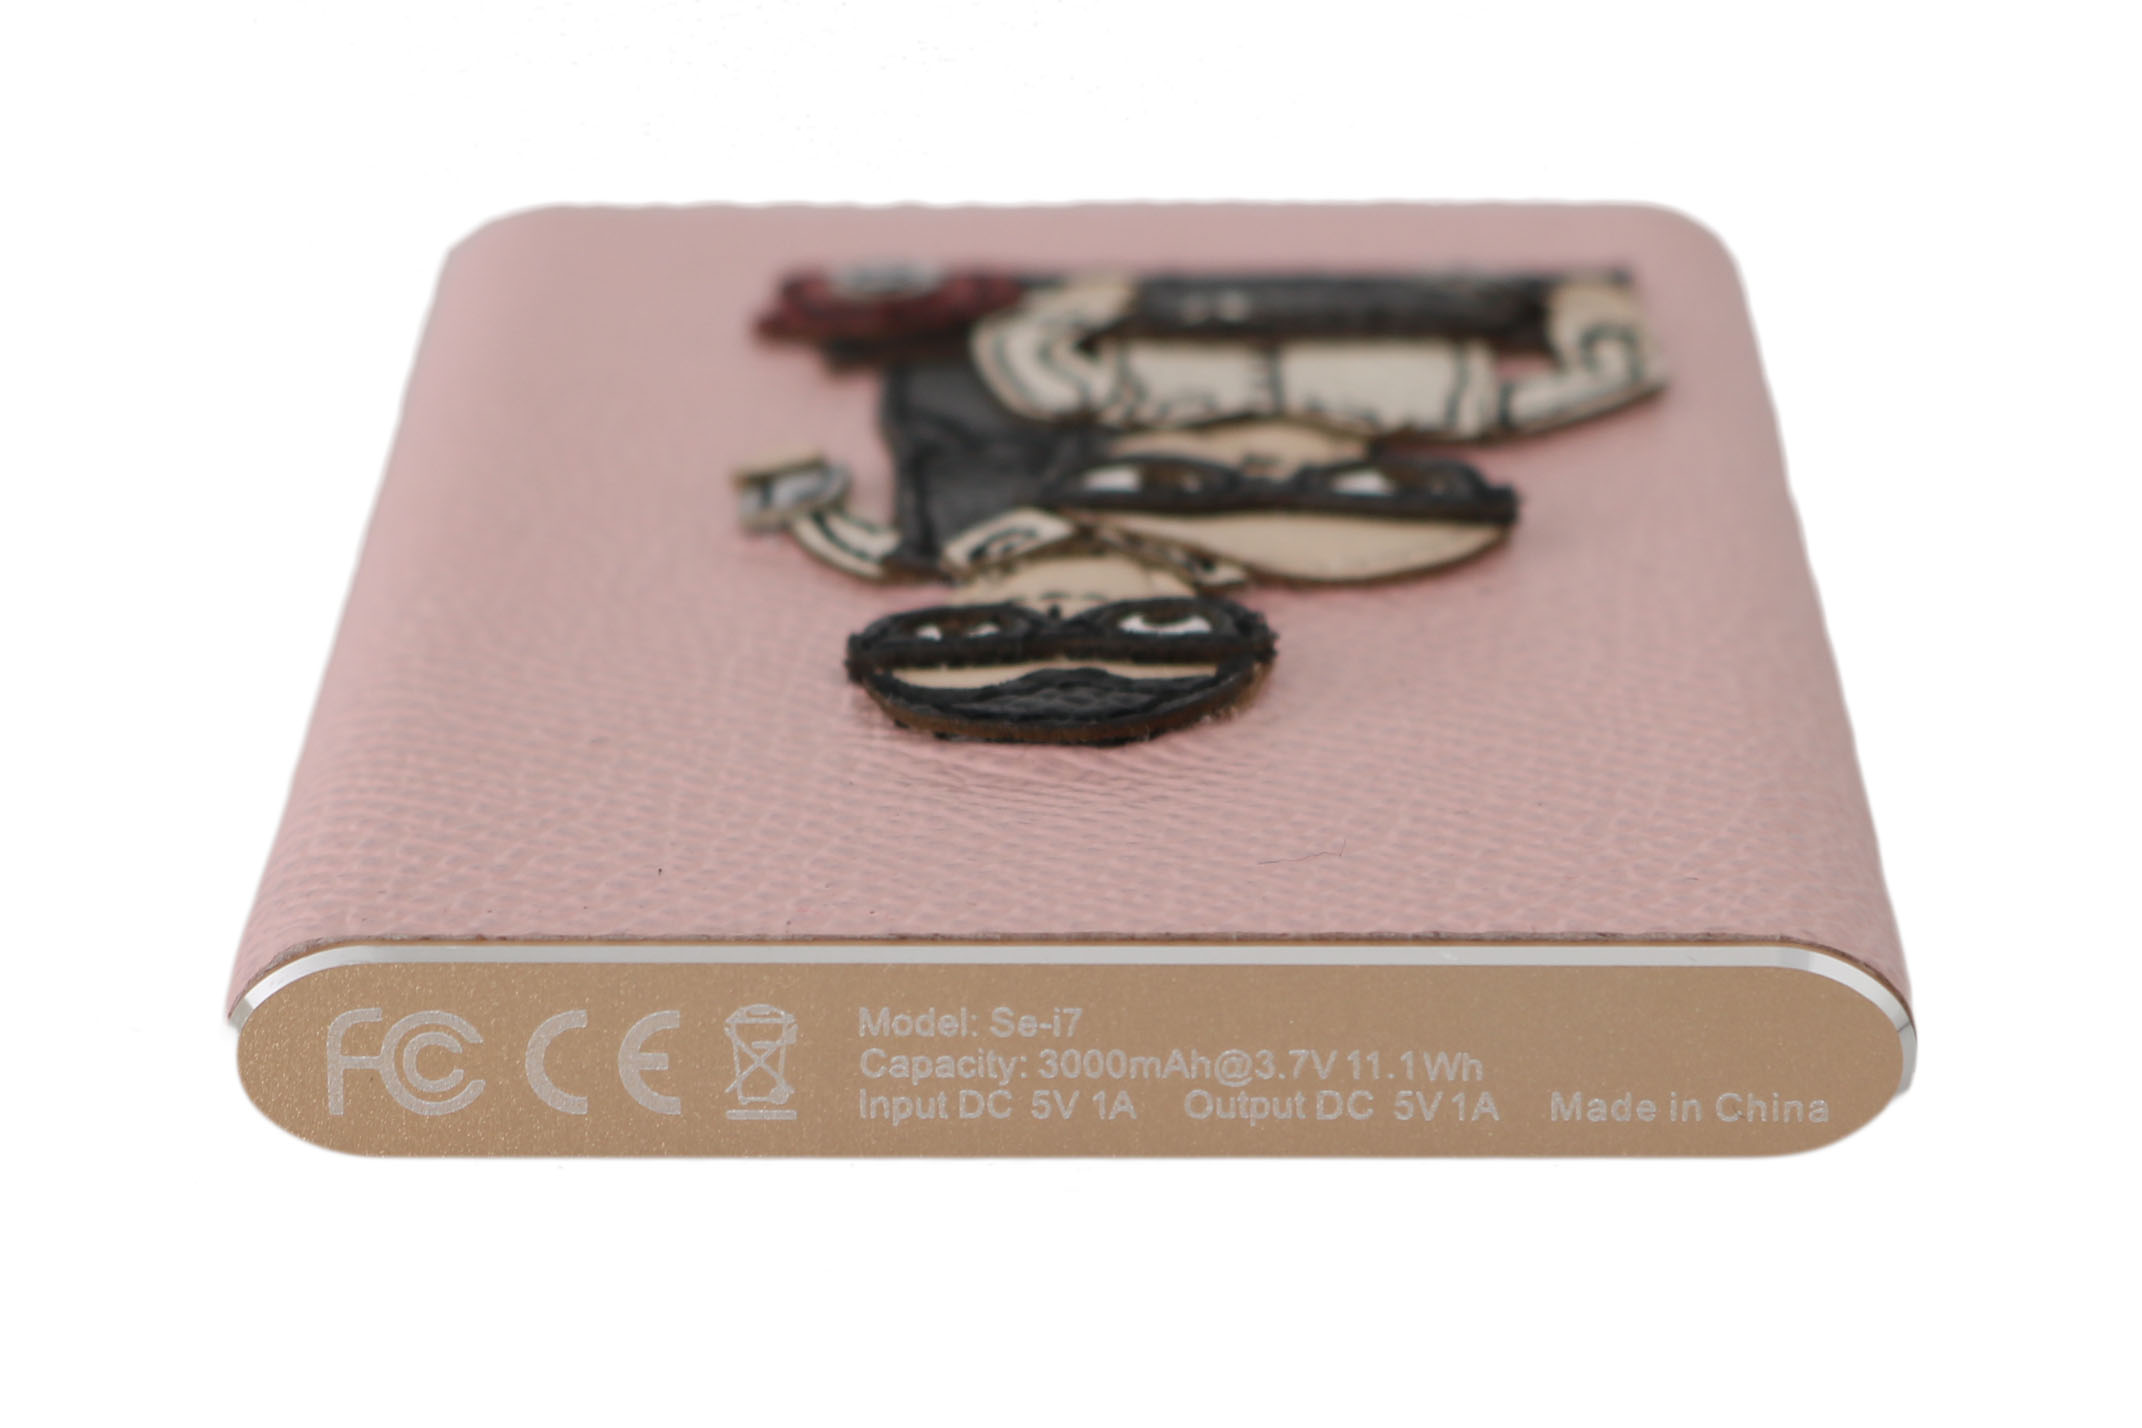 Charger USB Pink Leather #DGFAMILY Power Bank